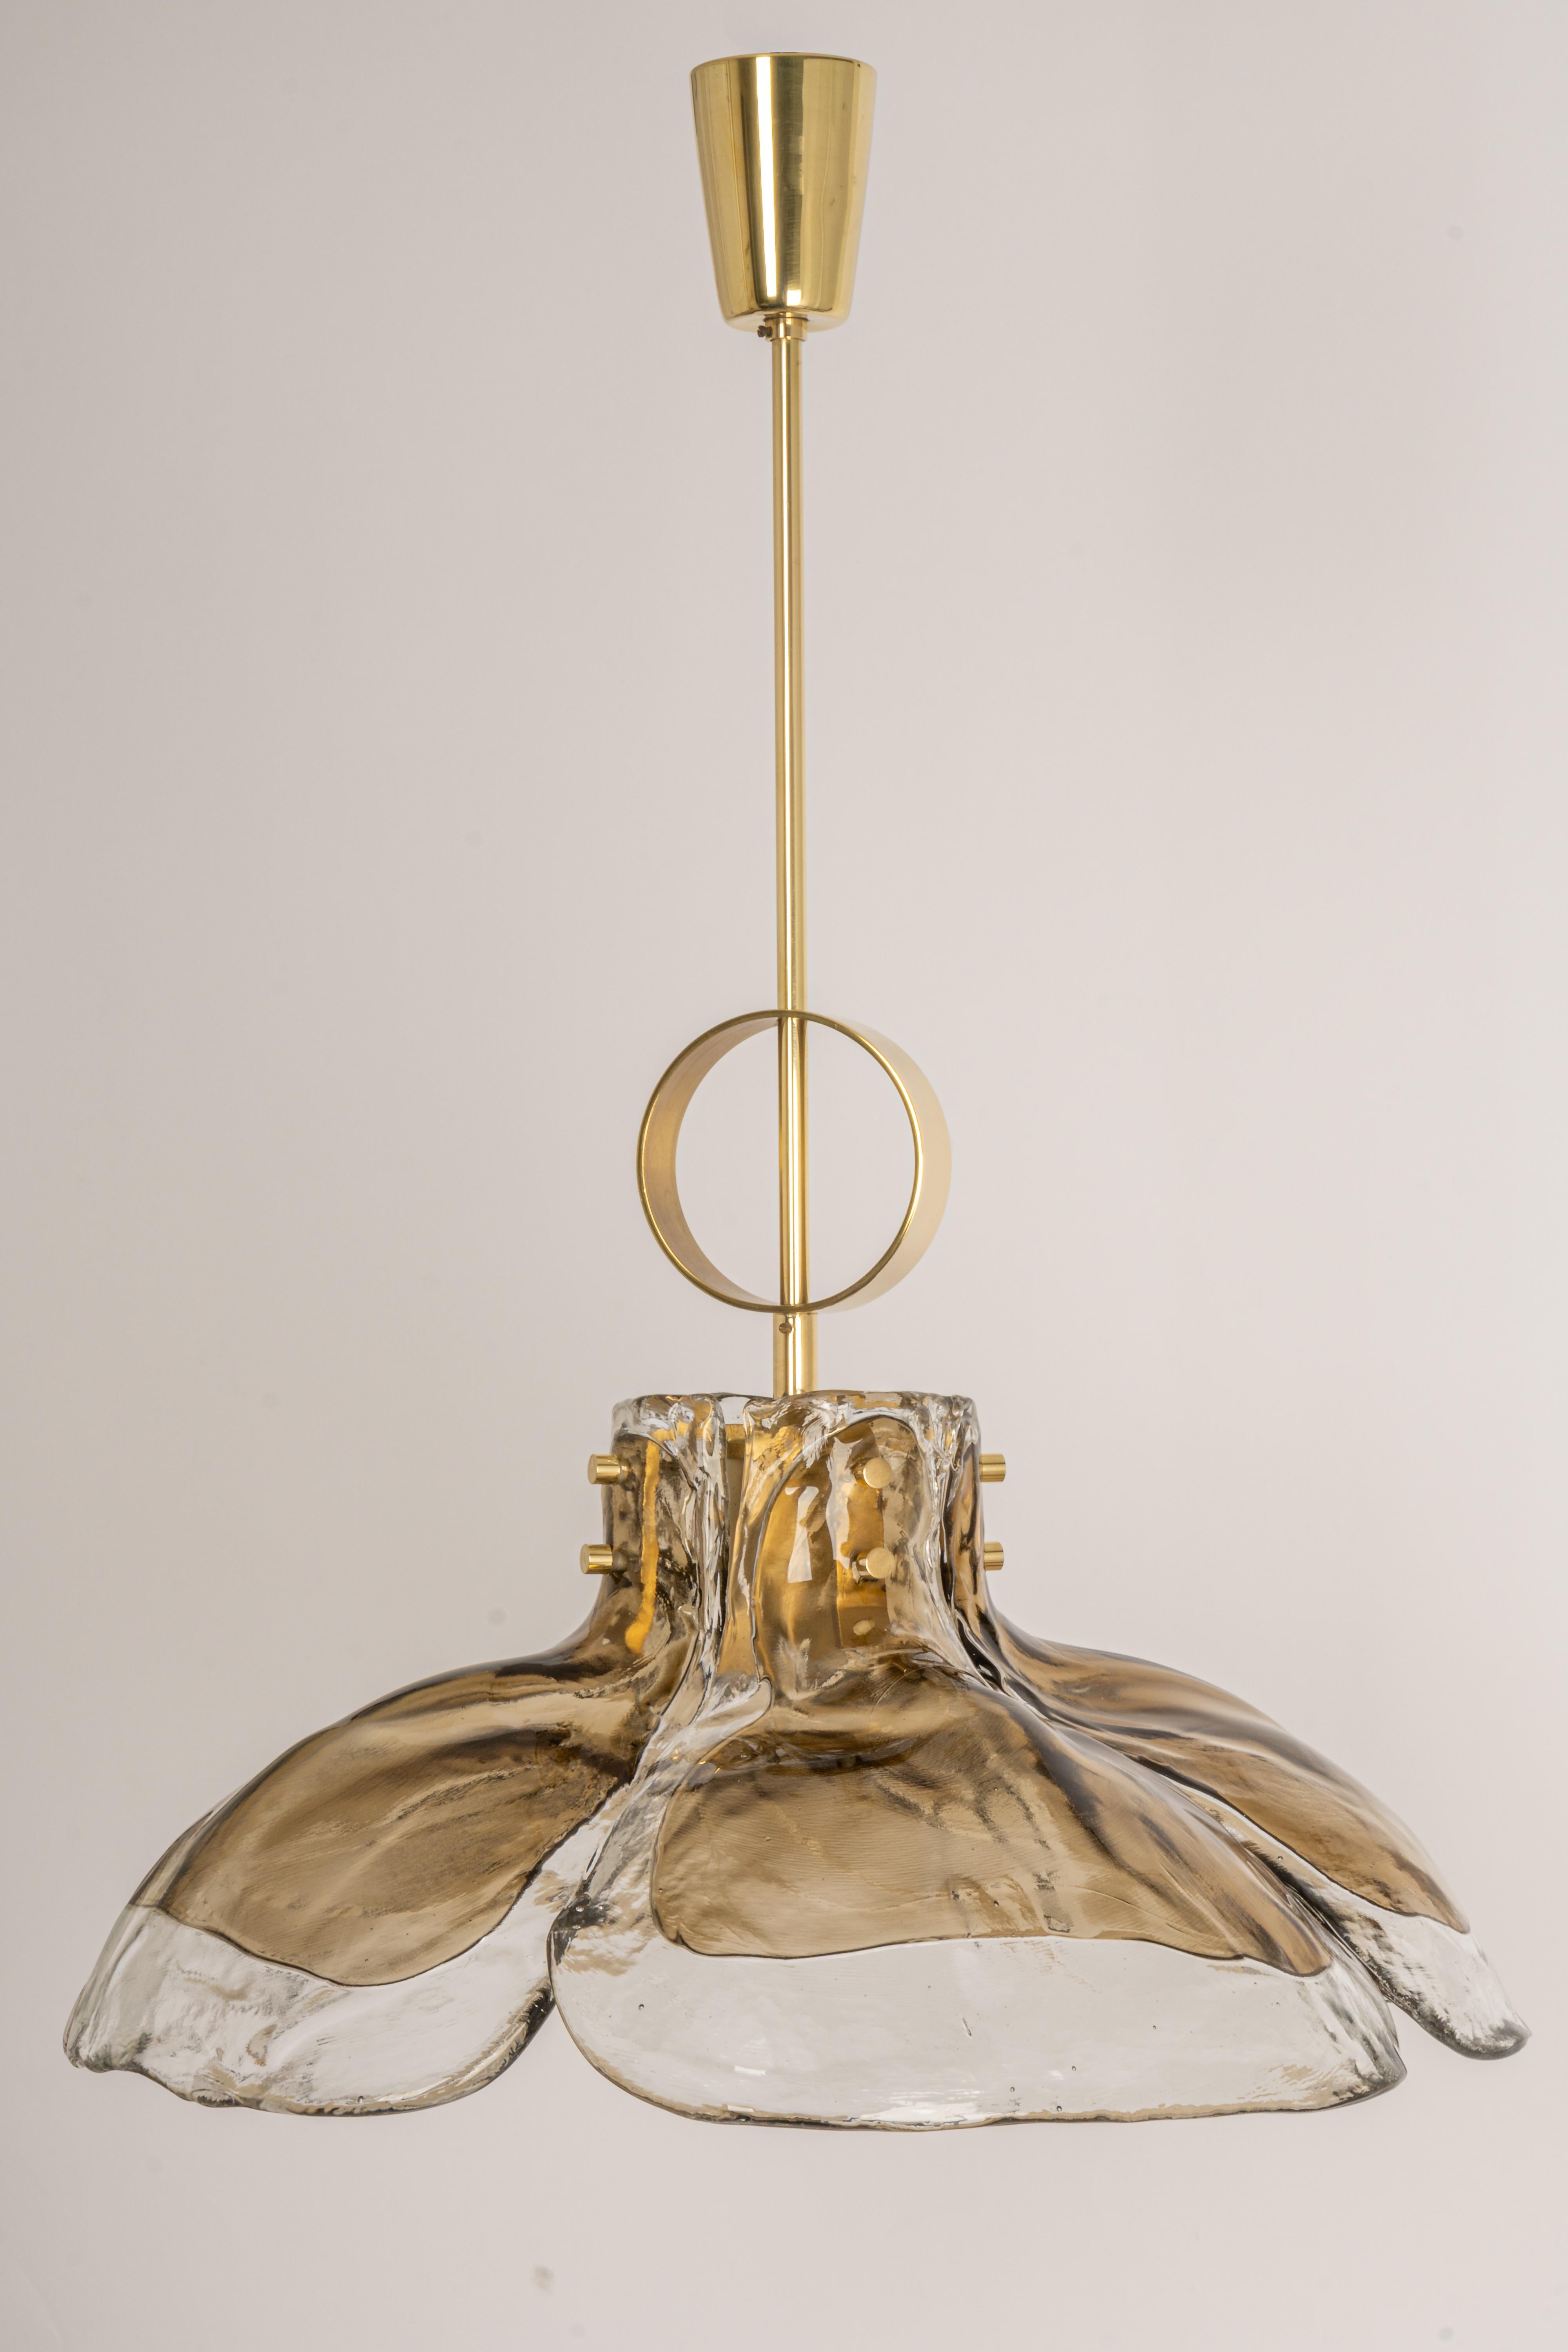 A stunning Murano smoked glass chandelier designed by Kalmar , Austria manufactured in the 1960s.
The chandelier is composed of 4 thick Murano glass elements attached to a metal frame.

High quality and in very good condition. Cleaned, well-wired